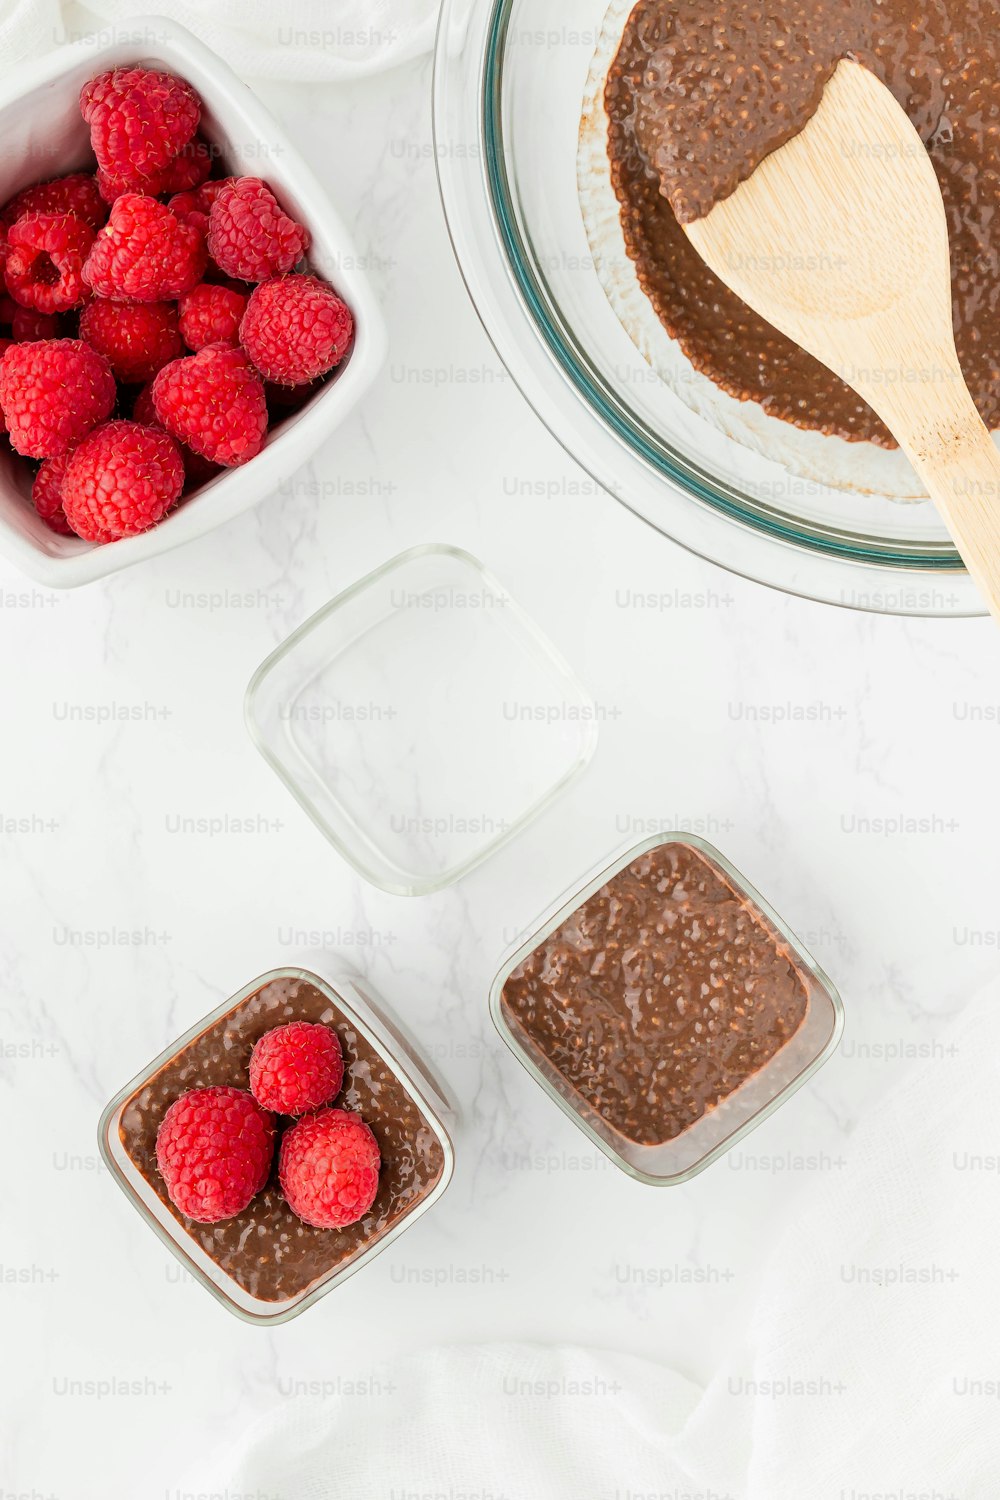 a bowl of raspberries and a bowl of chocolate pudding